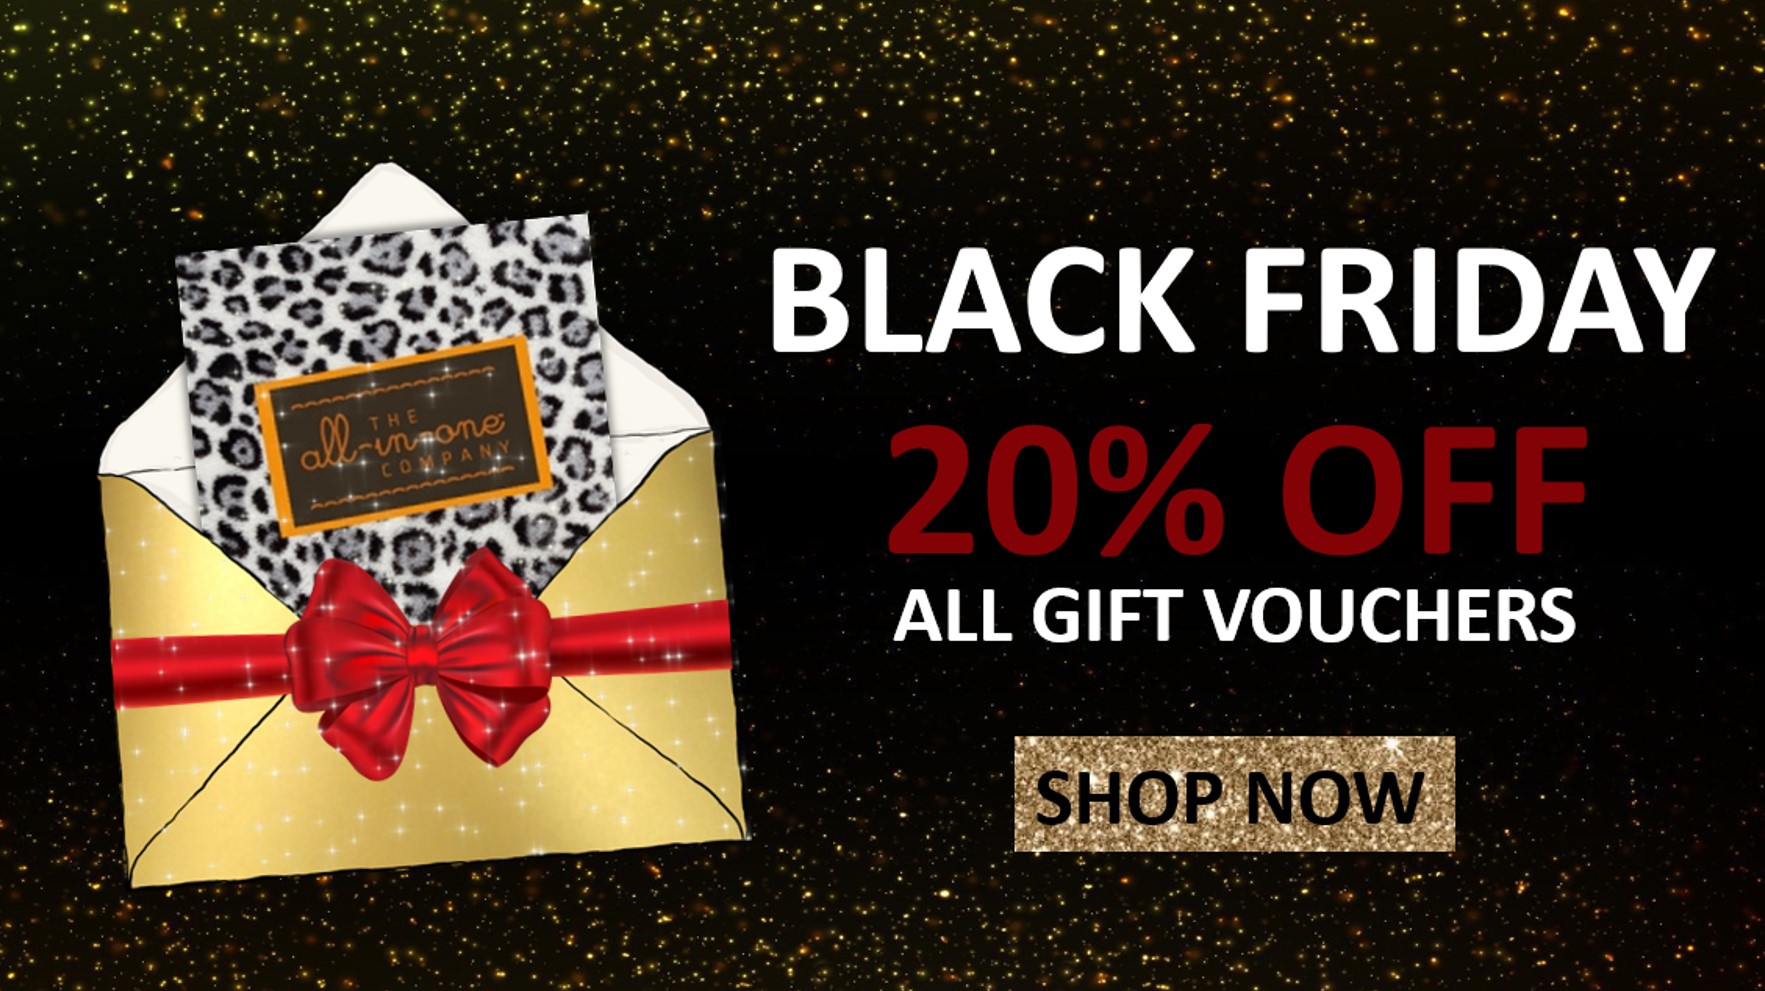 Cash Wise BLACK FRIDAY IS HERE! Get Your Holiday Shopping, 40% OFF